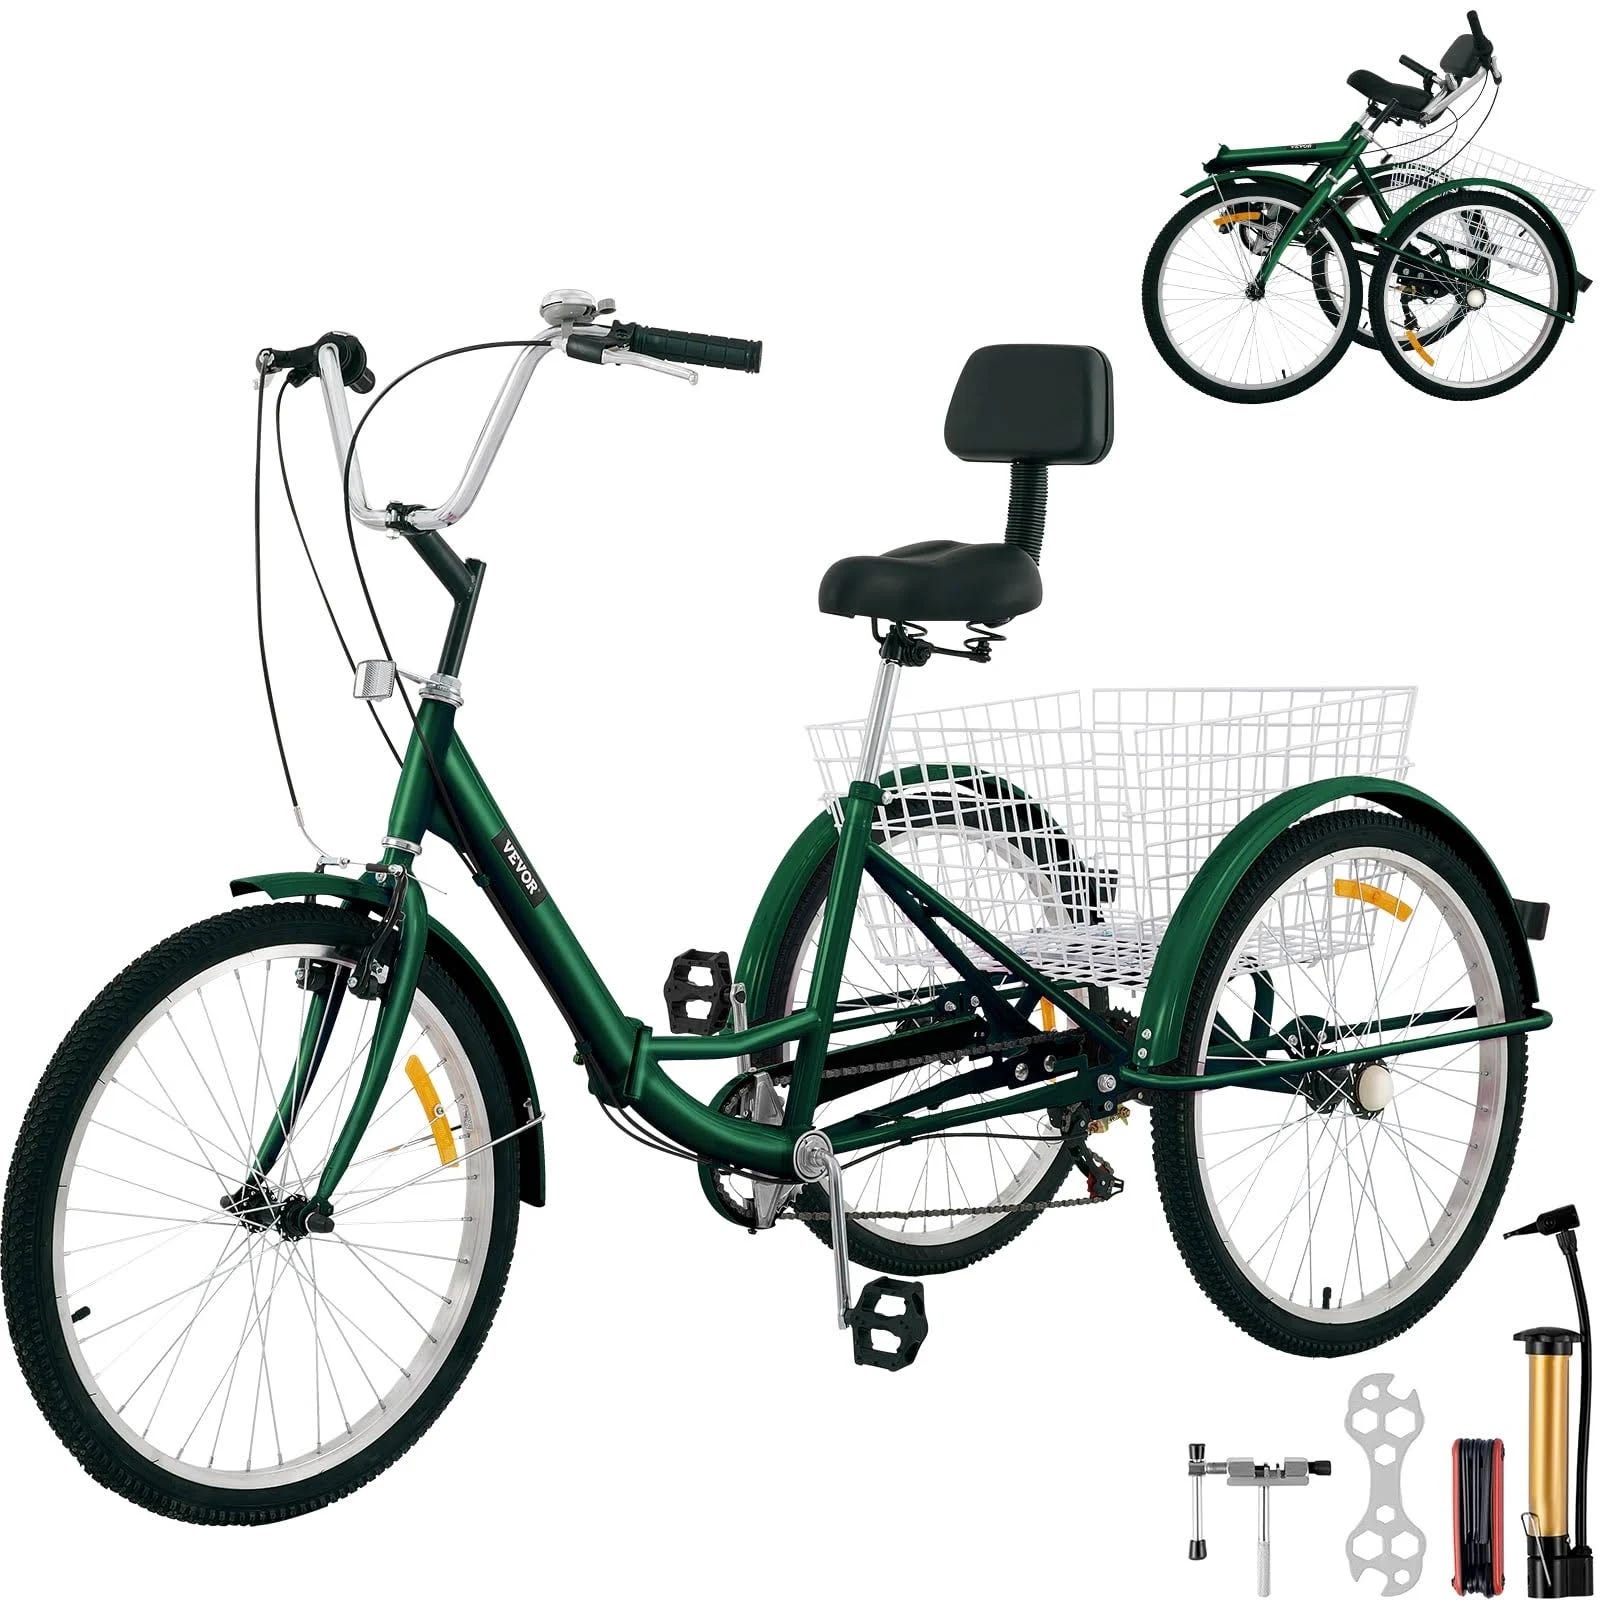 VEFOR Foldable Adult Tricycle with Colorful Design | Image